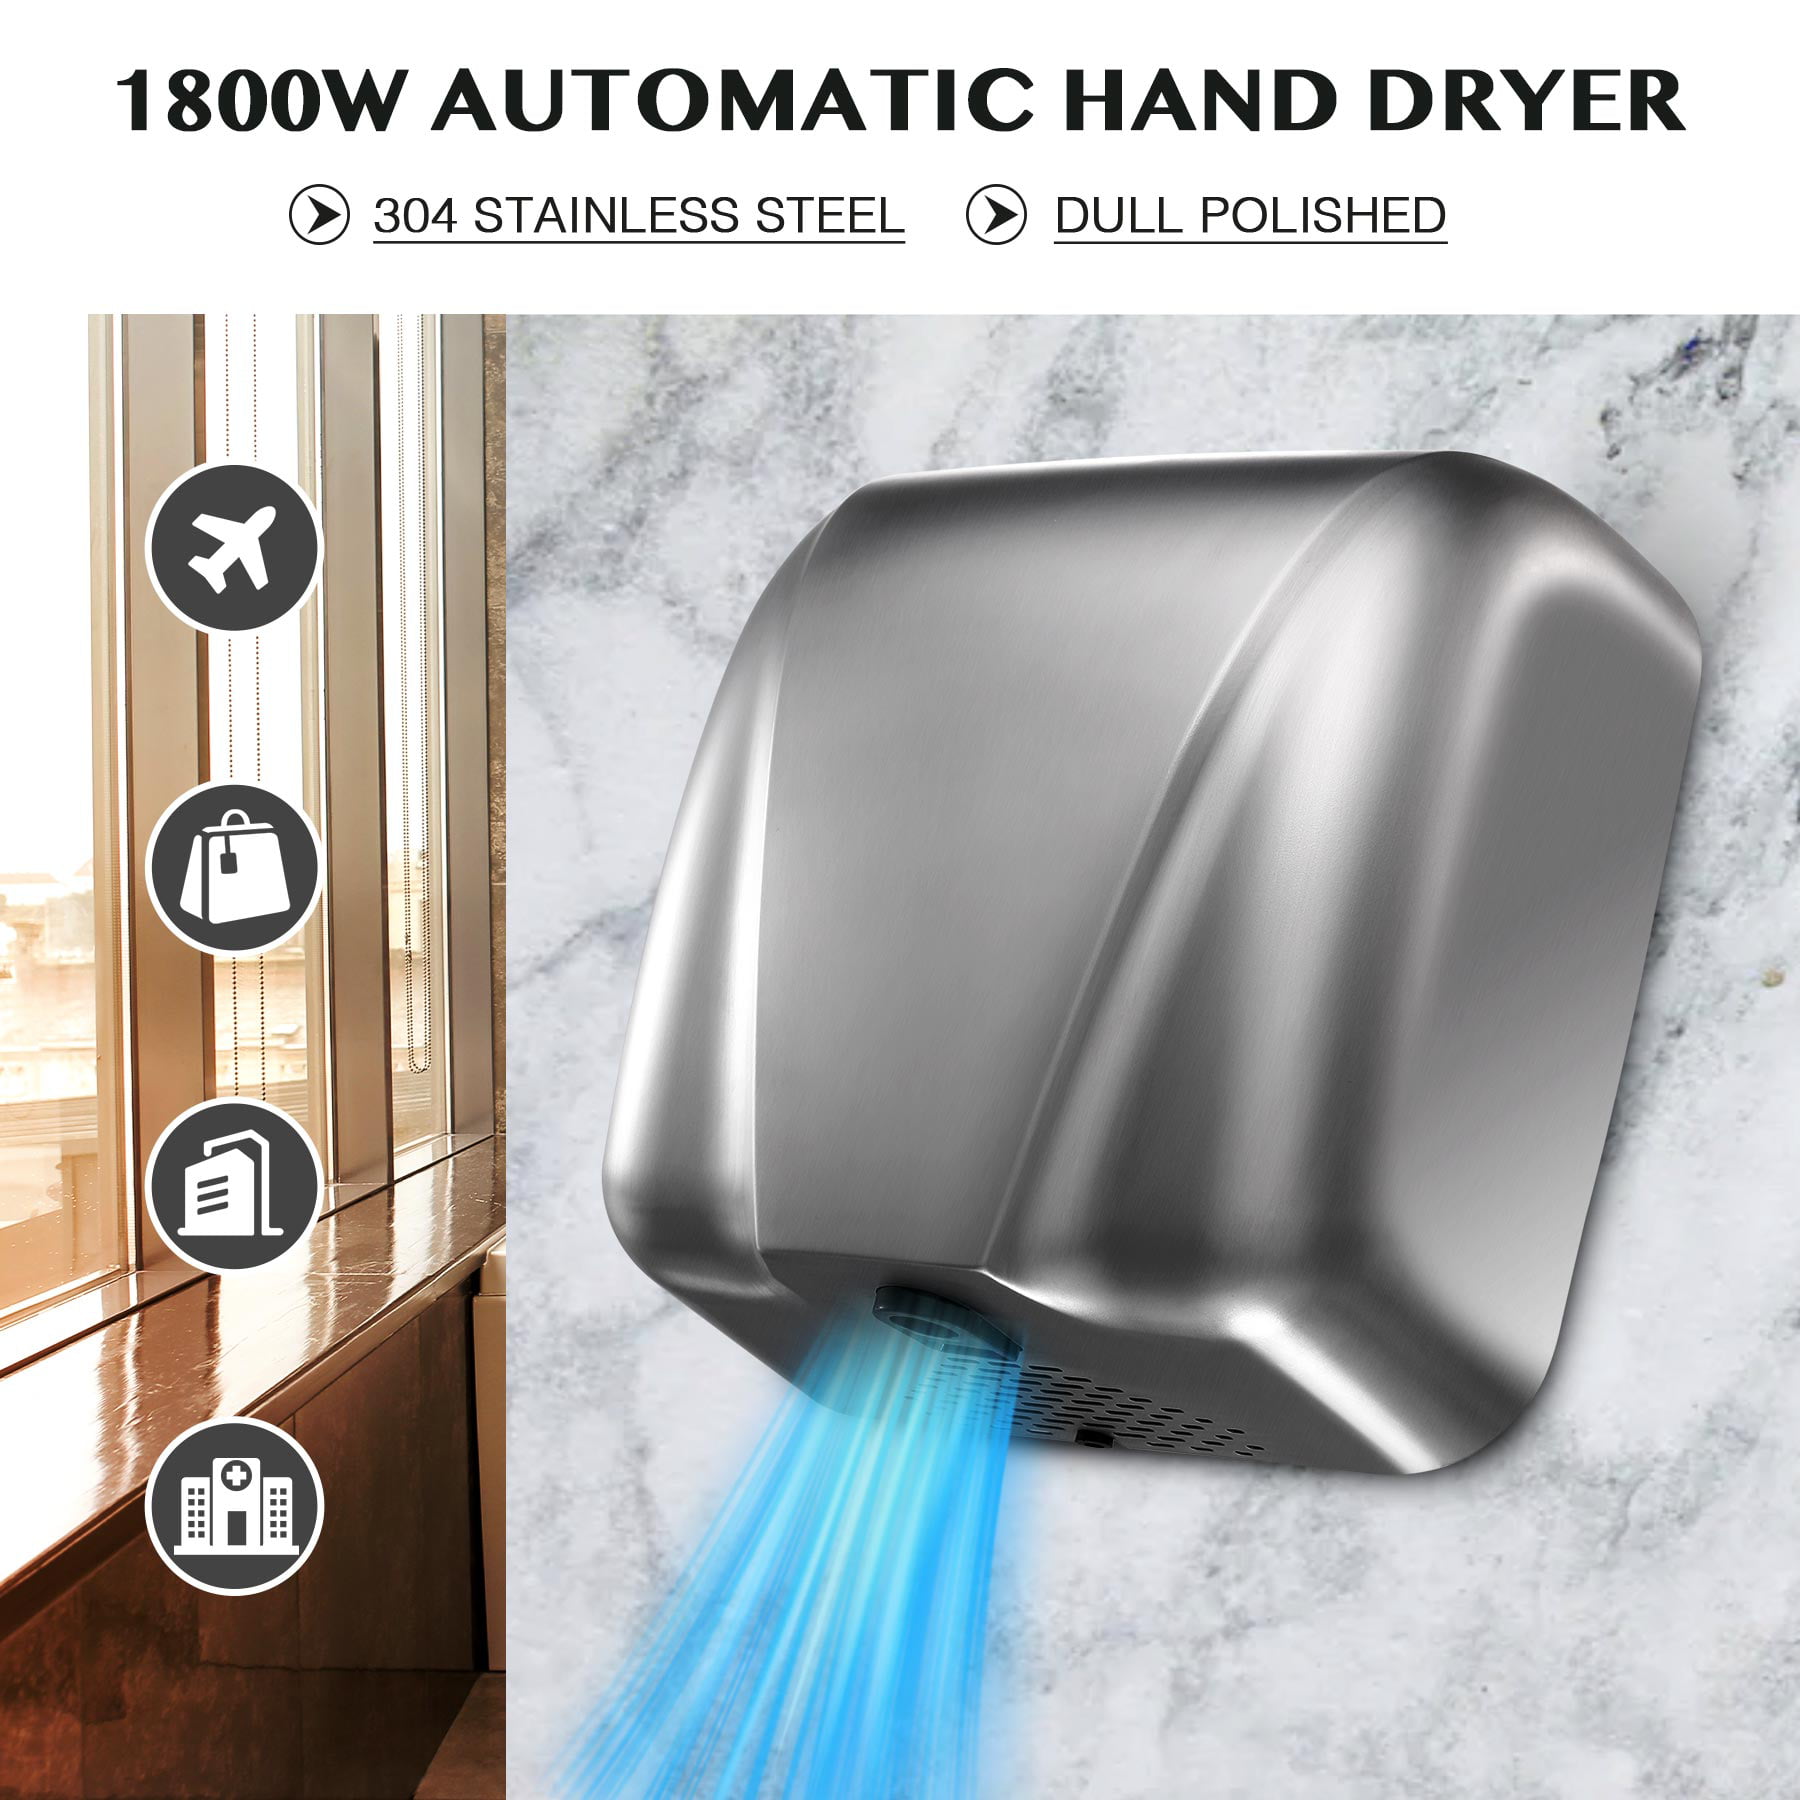 Dry Hands in 10s Electric Hand Dryer Machine Commercial for Bathroom Set of 4 Powerful 1800W Low Noise 70 dB Polished Stainless Steel 